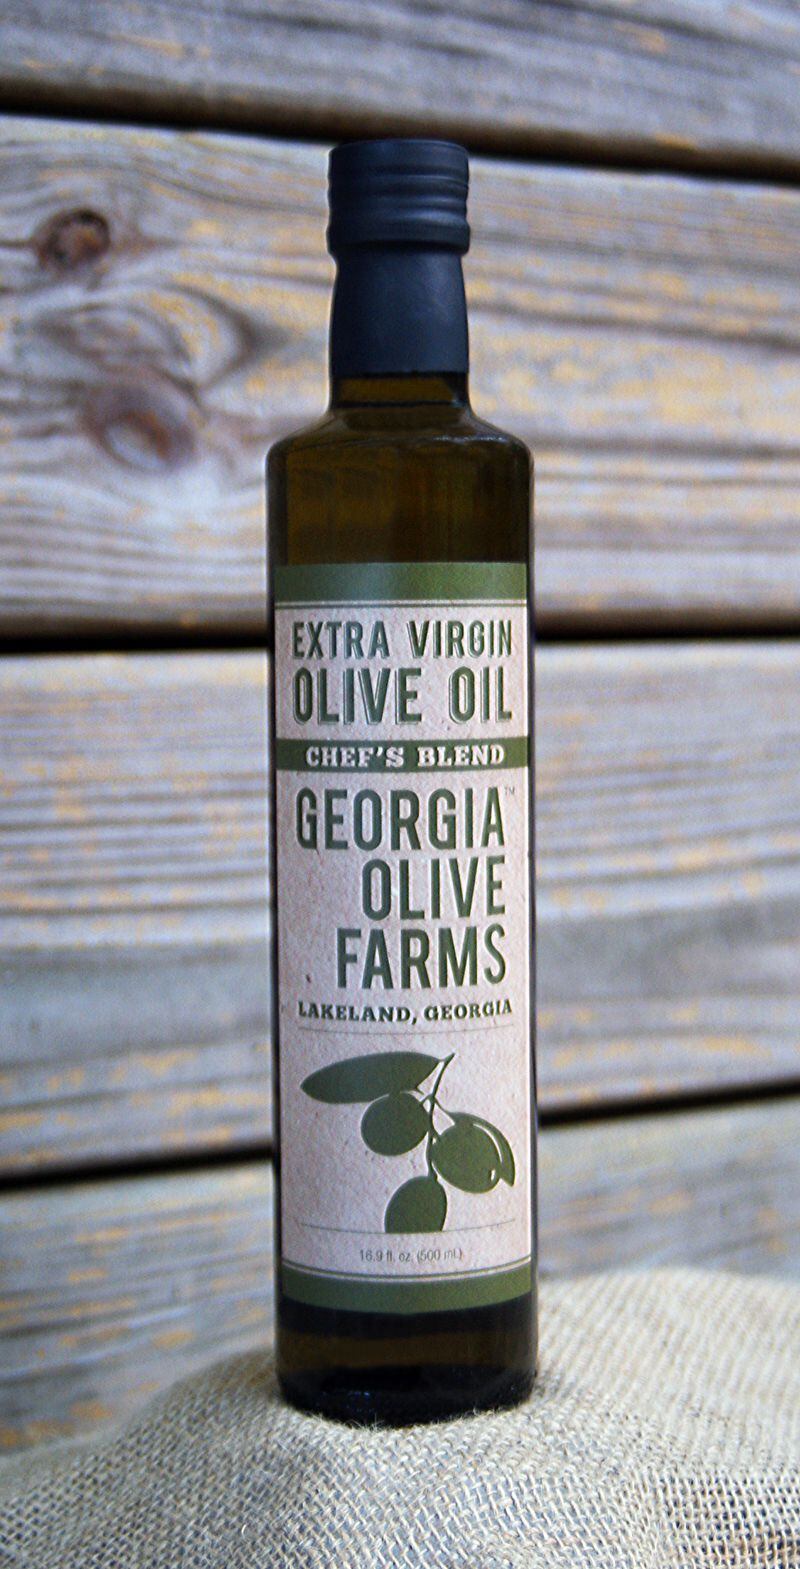 Chef’s Blend Extra Virgin Olive Oil from Georgia Olive Farms